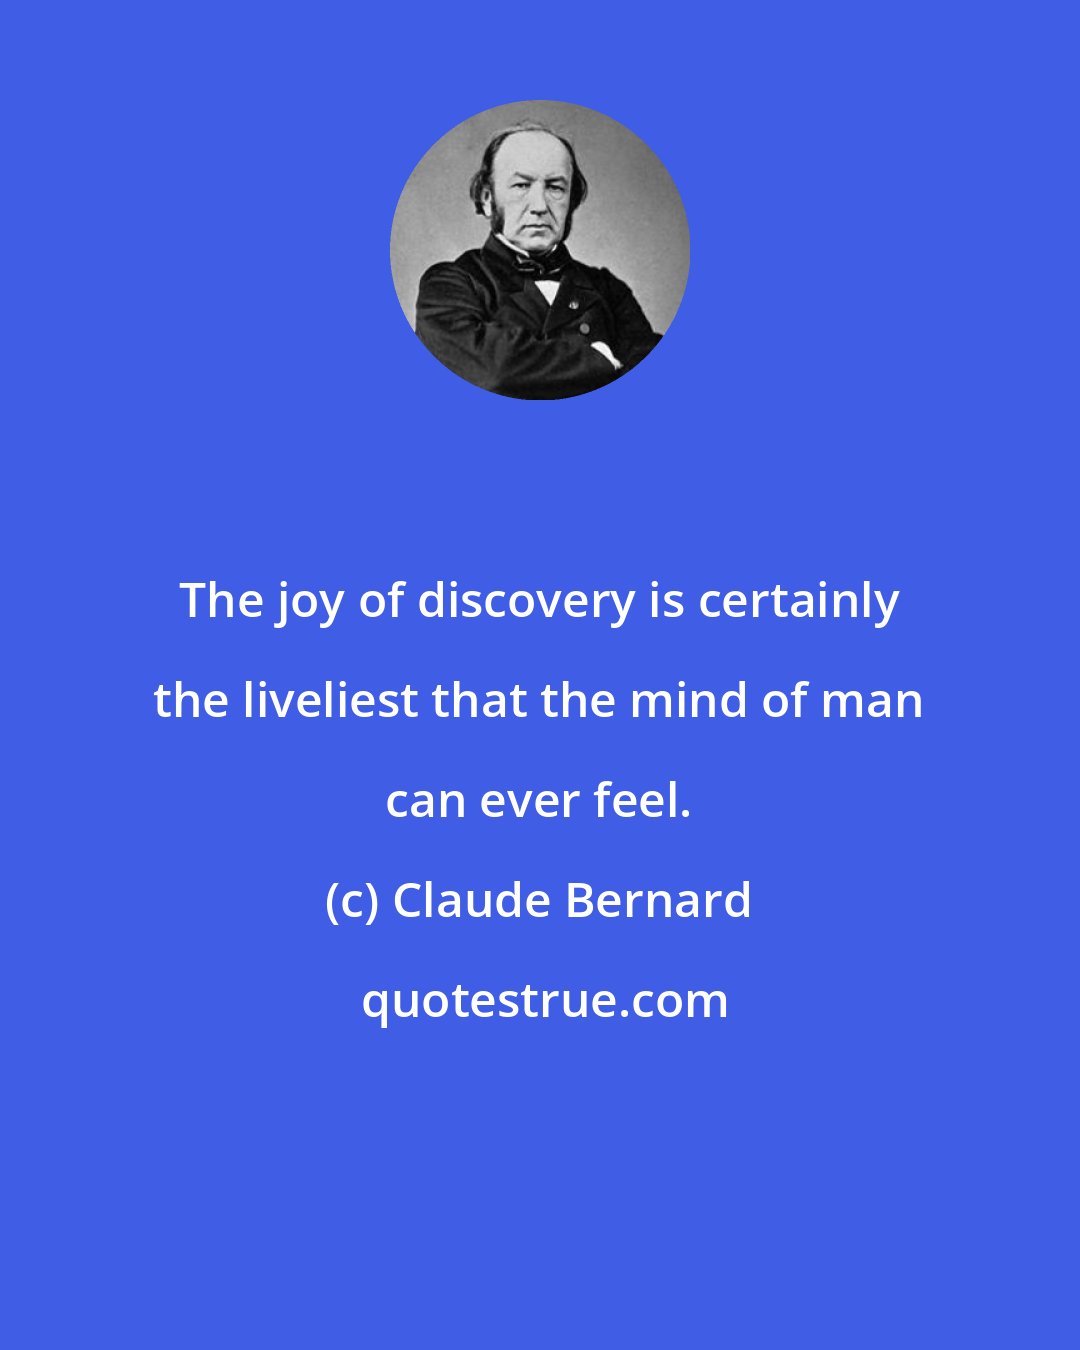 Claude Bernard: The joy of discovery is certainly the liveliest that the mind of man can ever feel.